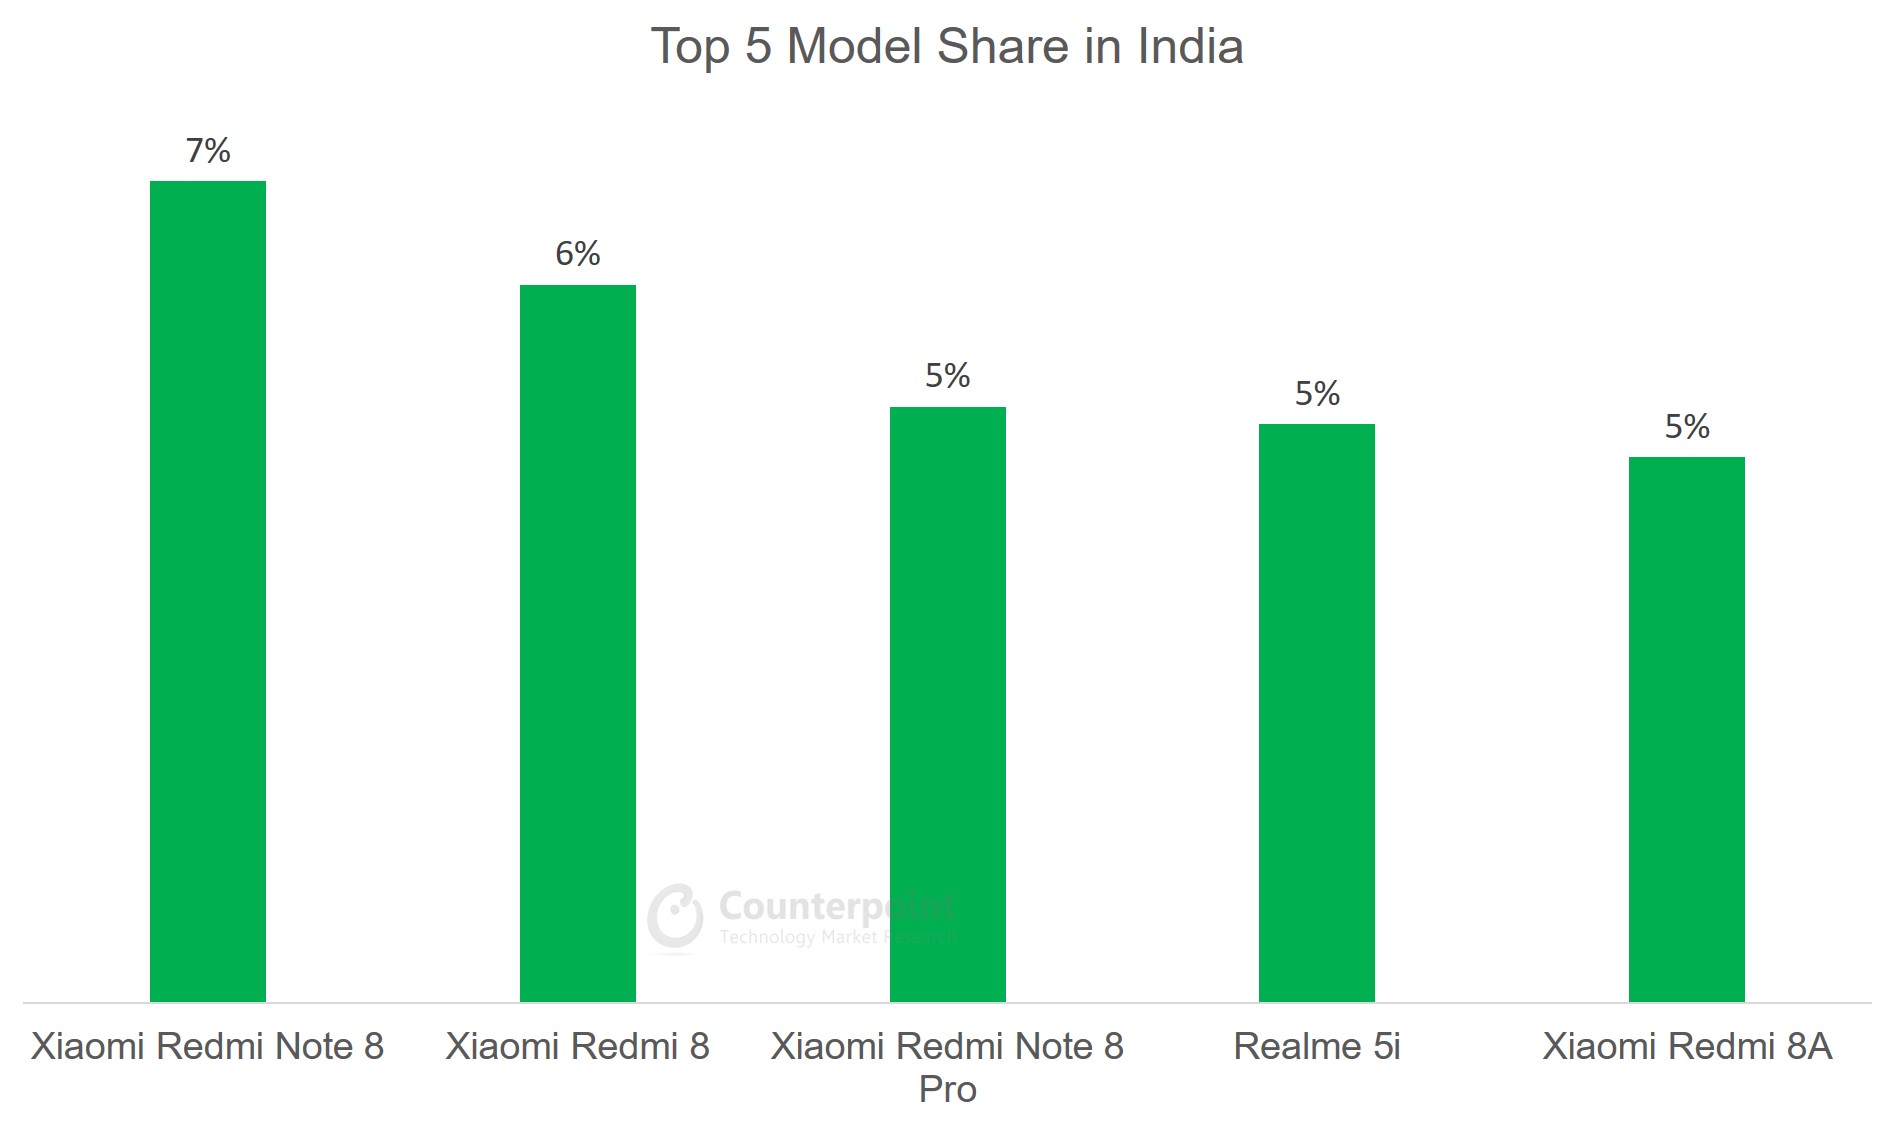 India Top 5 Model Share Jan 2020